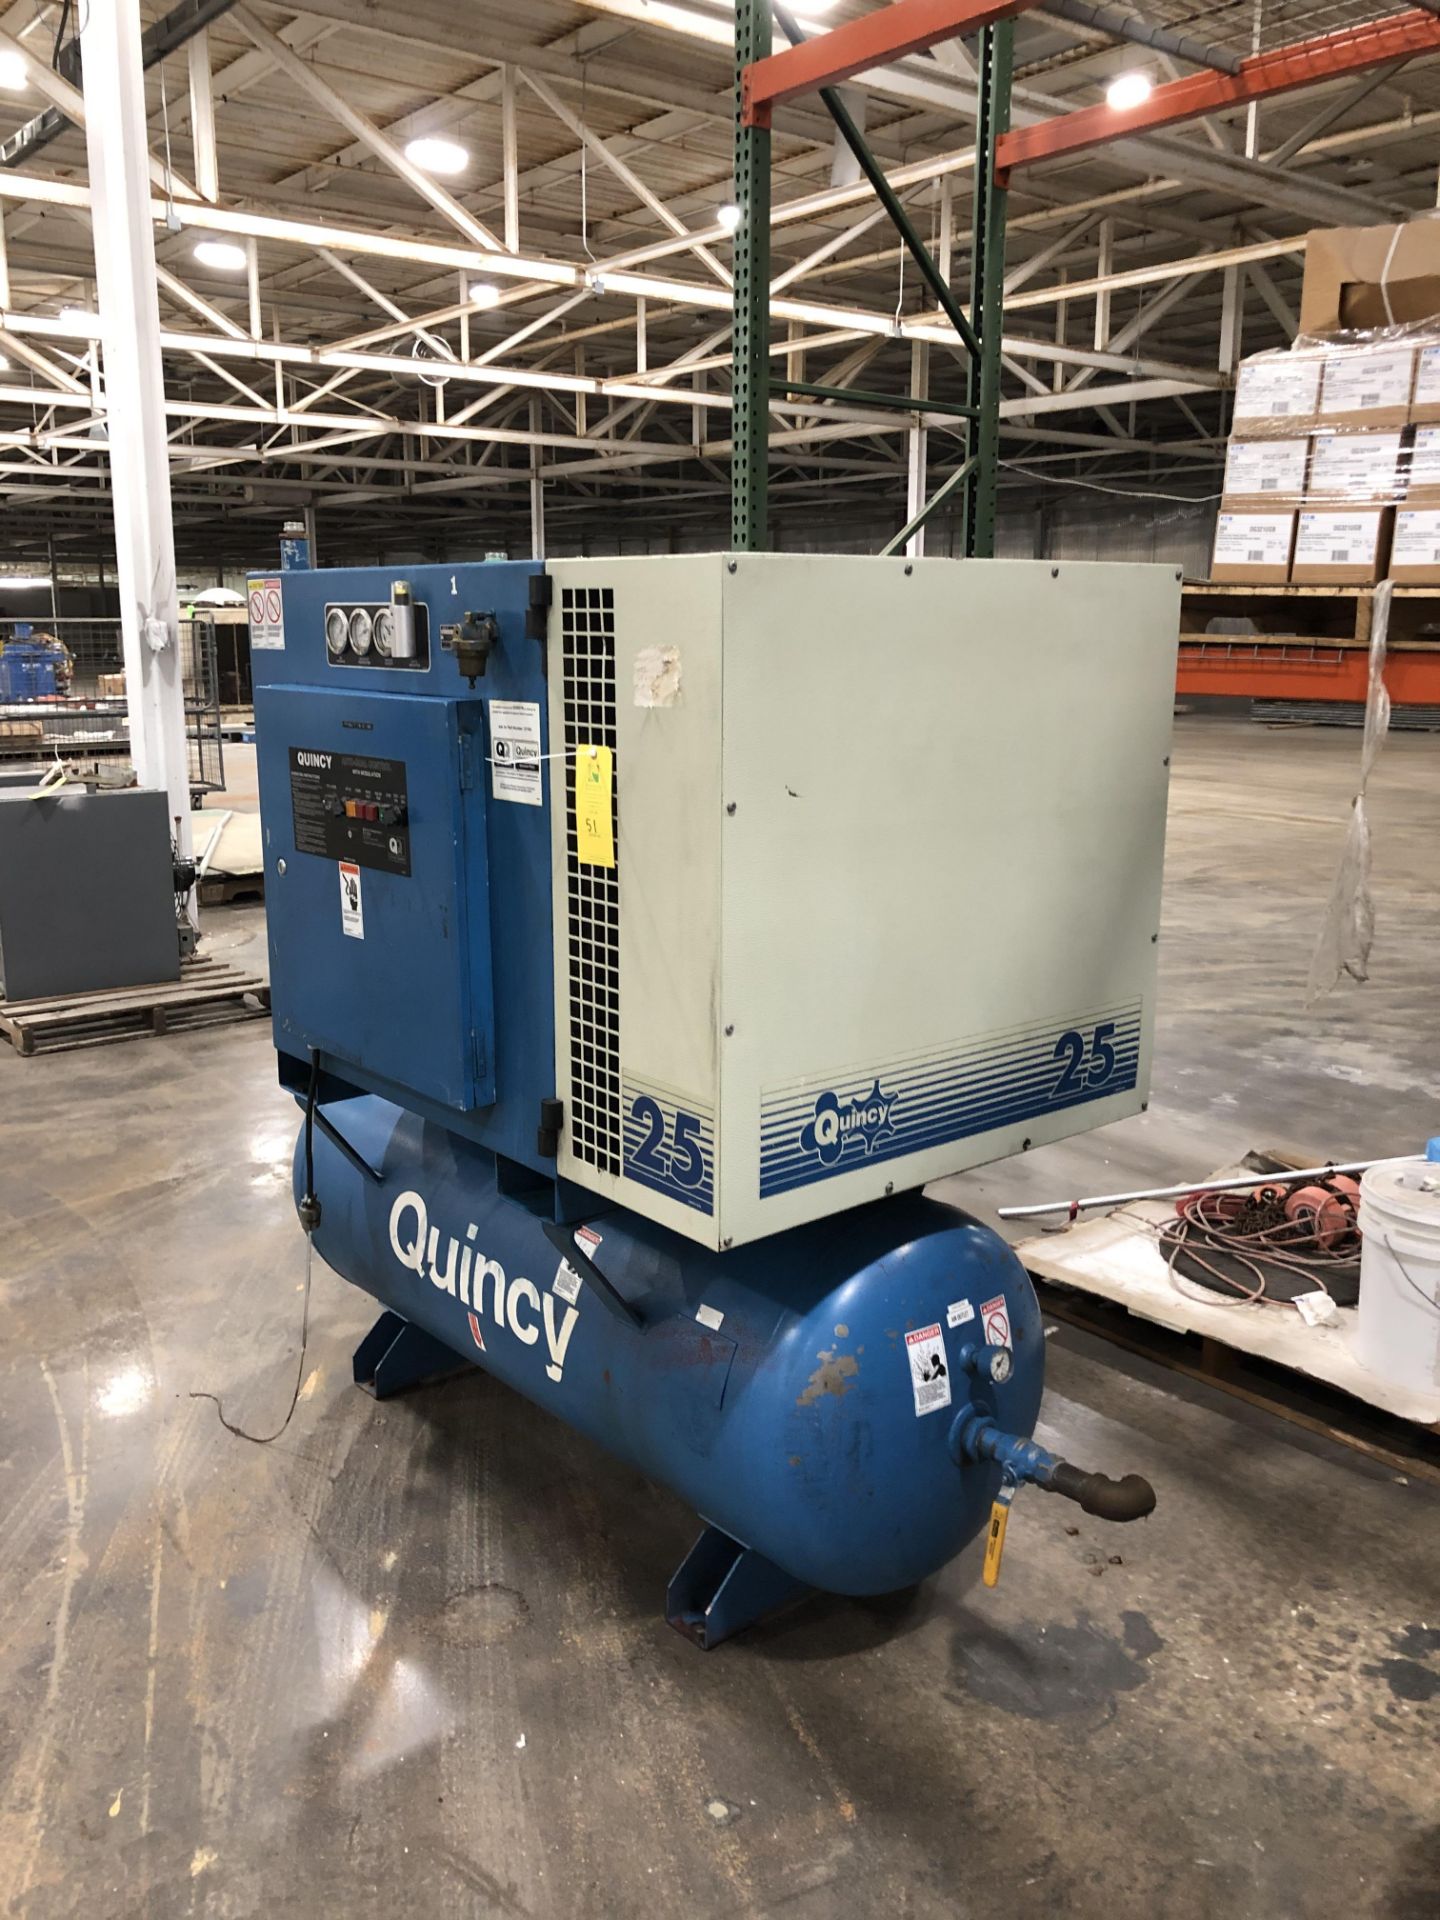 Quincy Air Compressor, 64,028.2 Hours, Rigging/ Loading Fee: $100 - Image 2 of 6